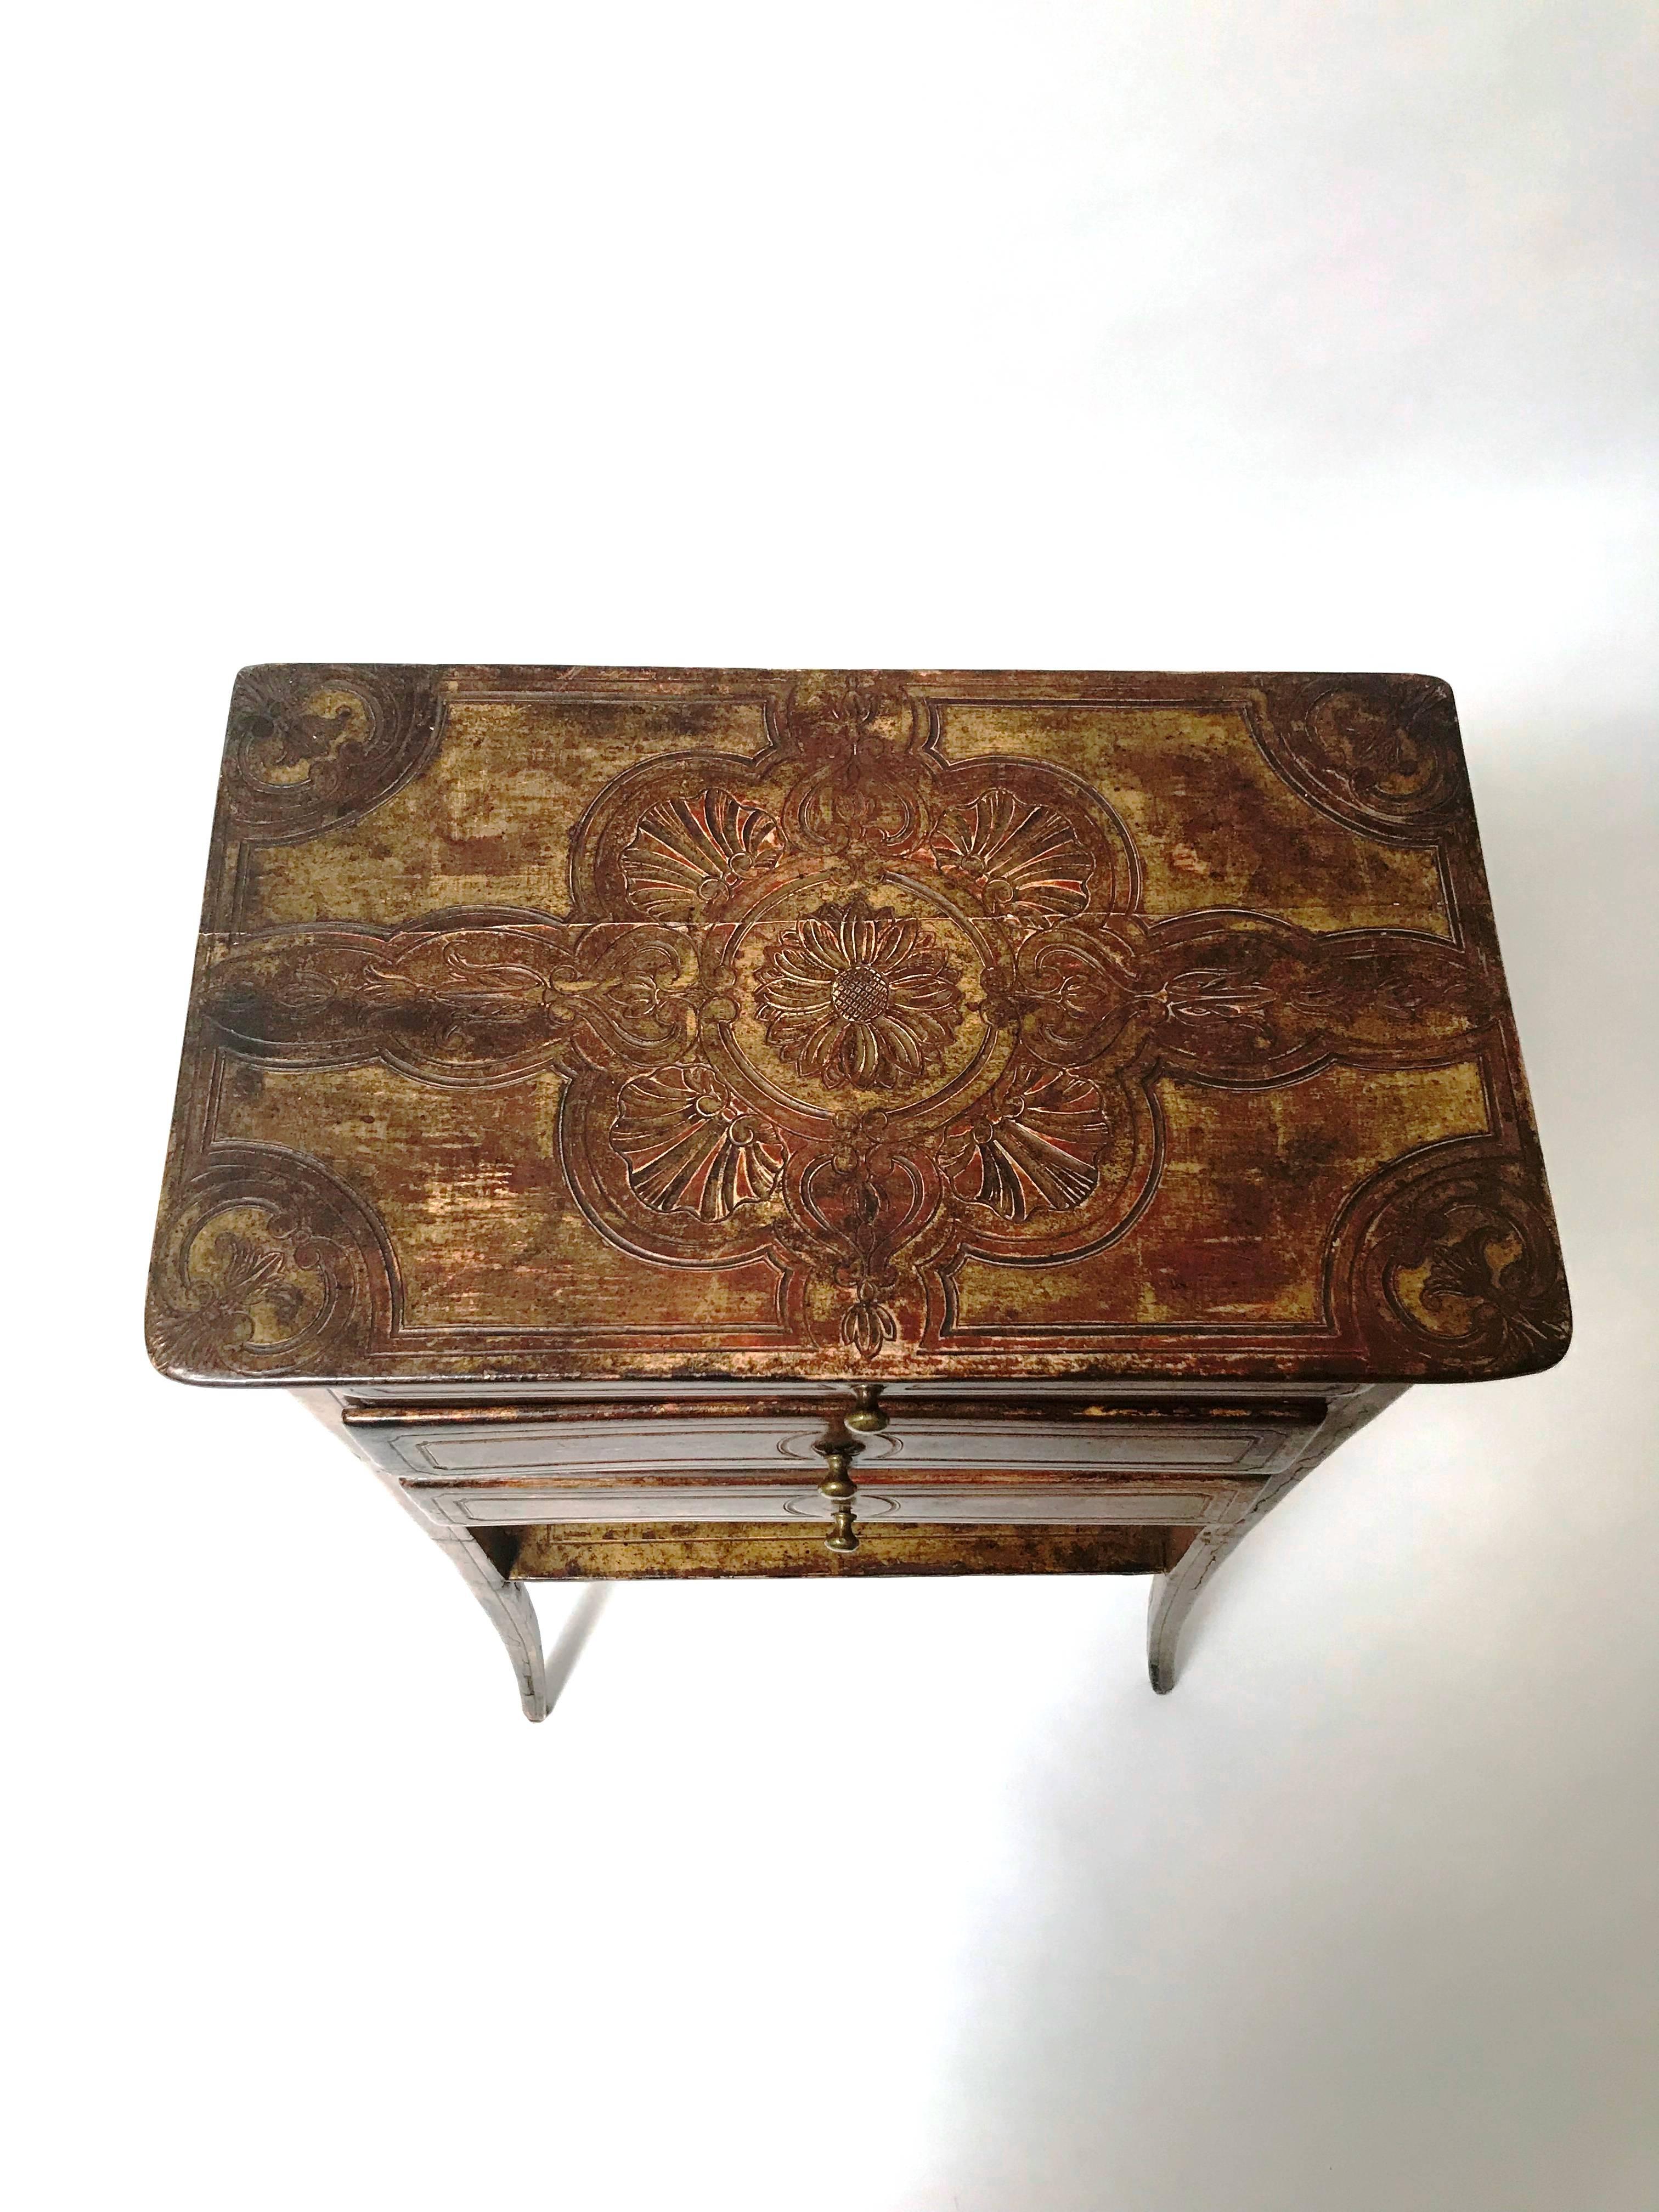 A quite rare and exquisite 18th century Venetian petite commode / small table with original gilt finish, incised with floral designs, with wonderful pagination.